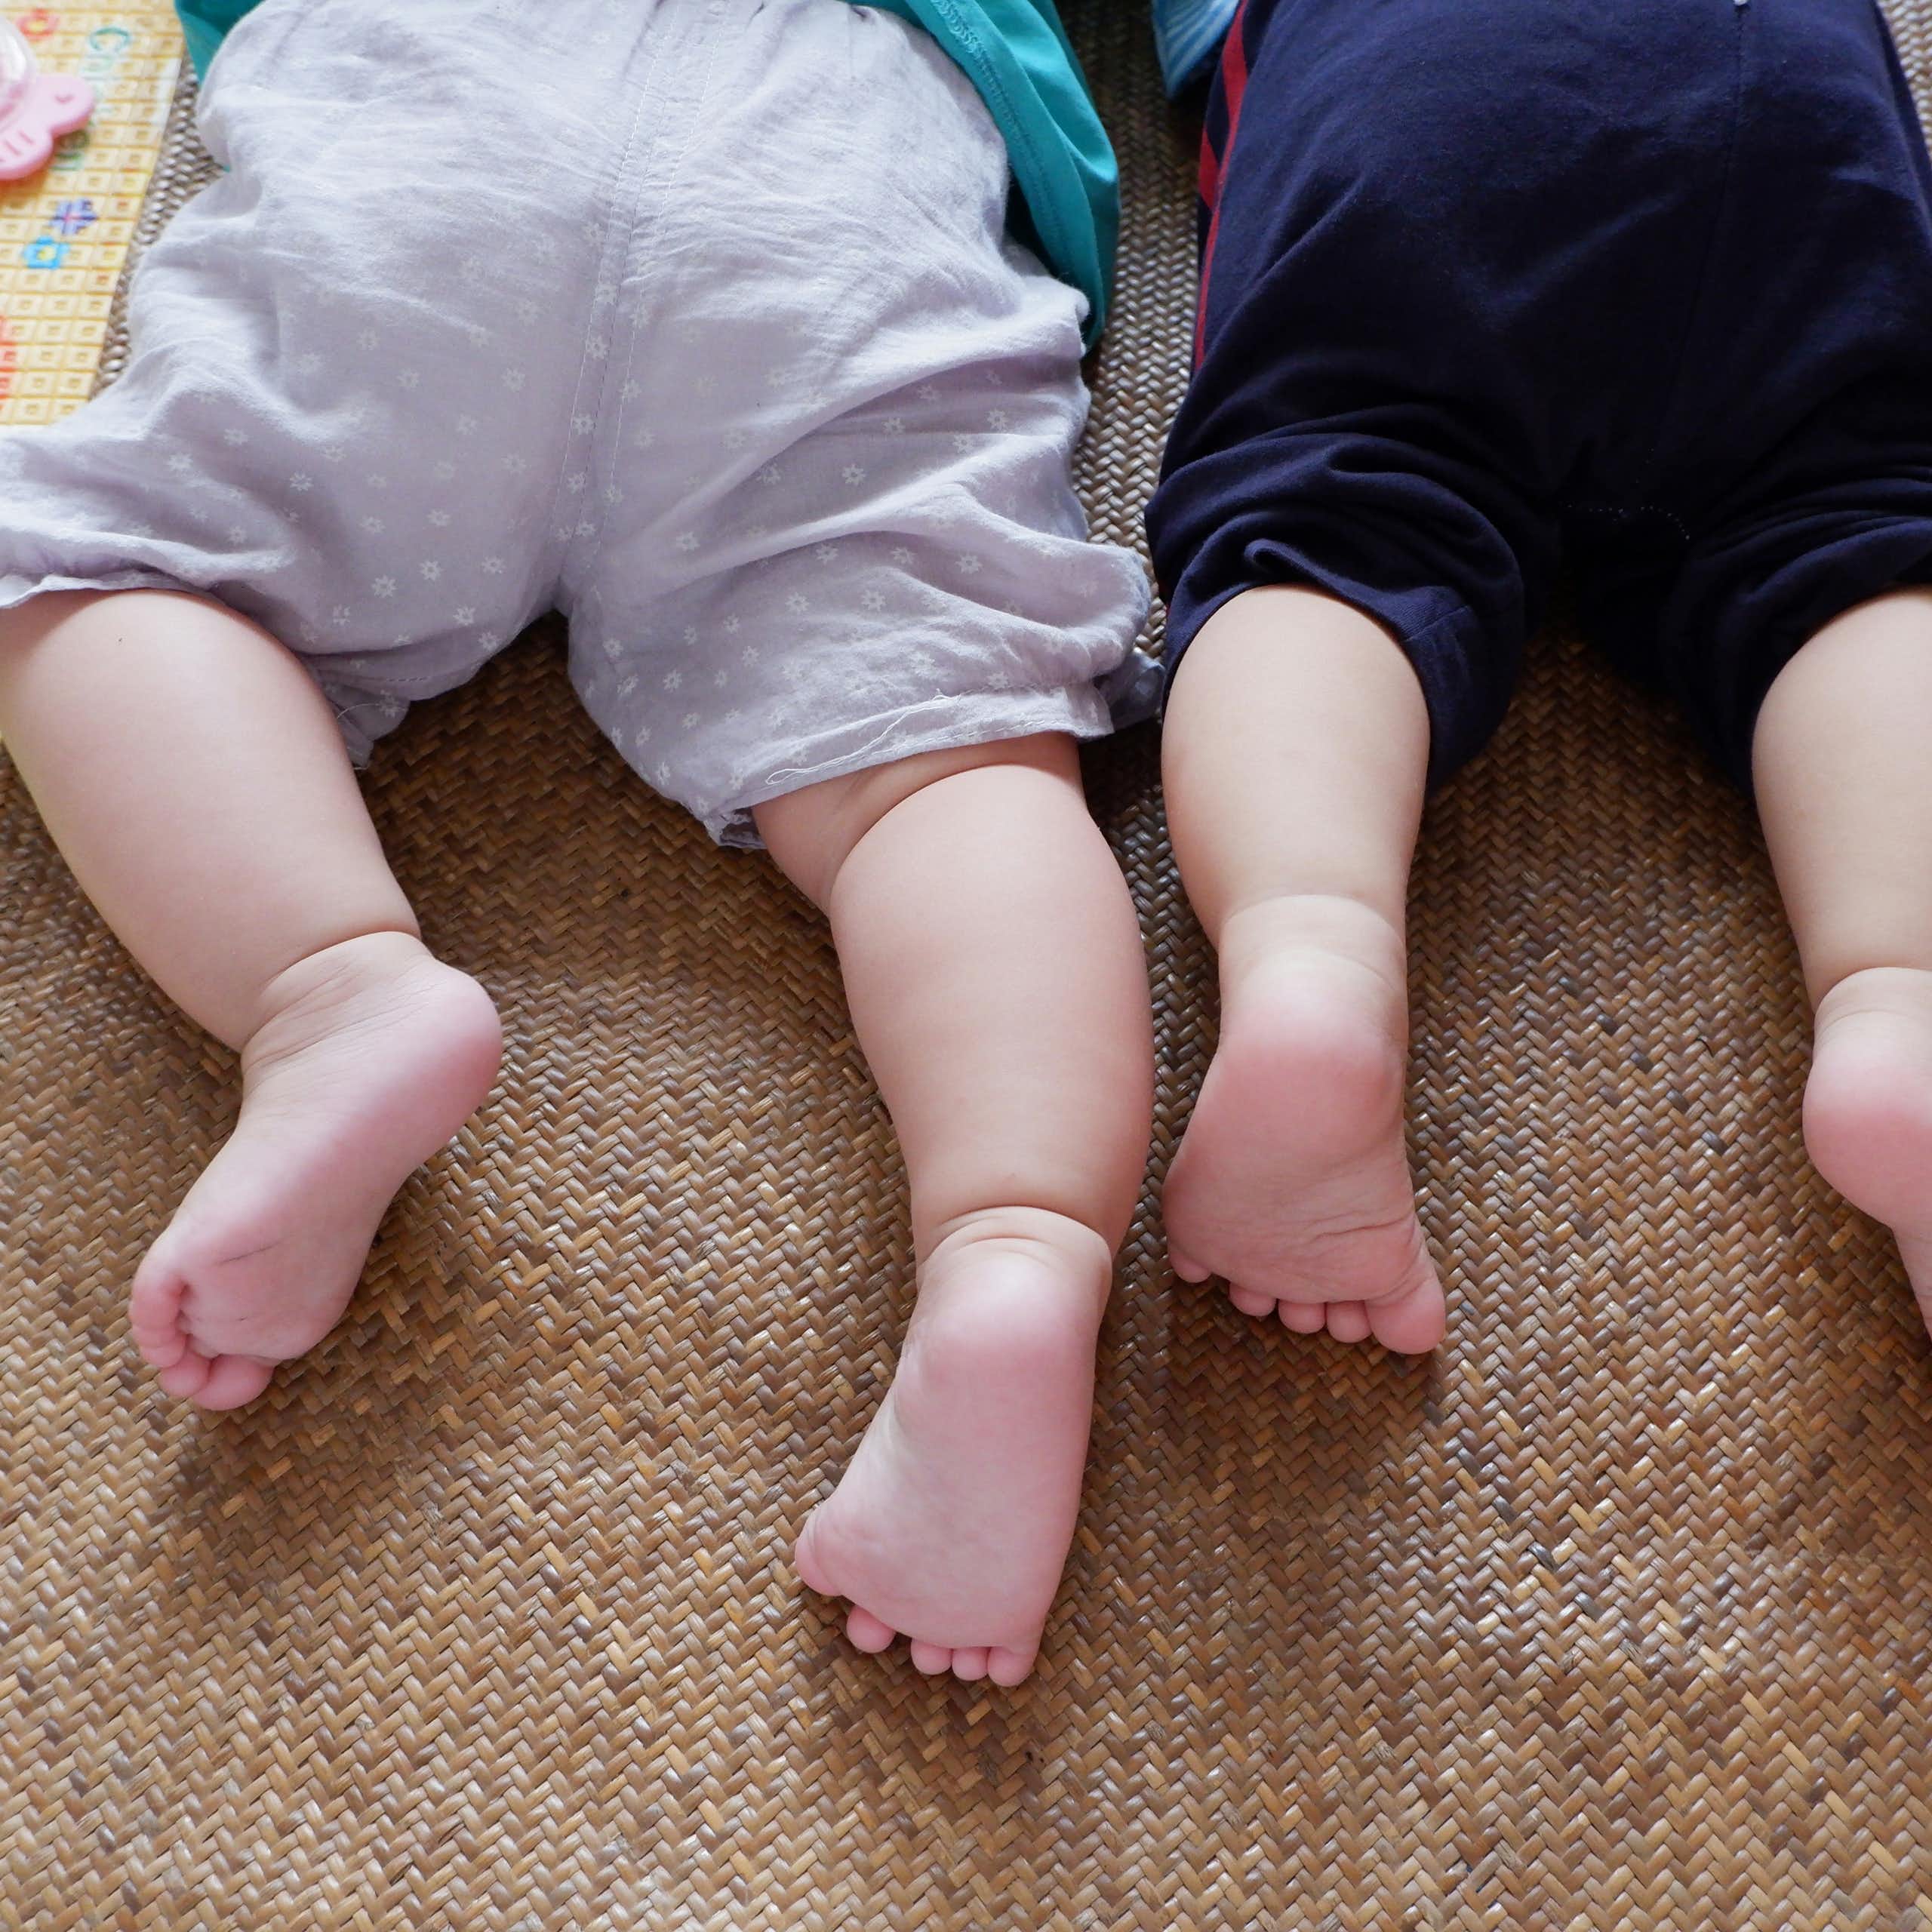 Two babies lie side by side on play mats.